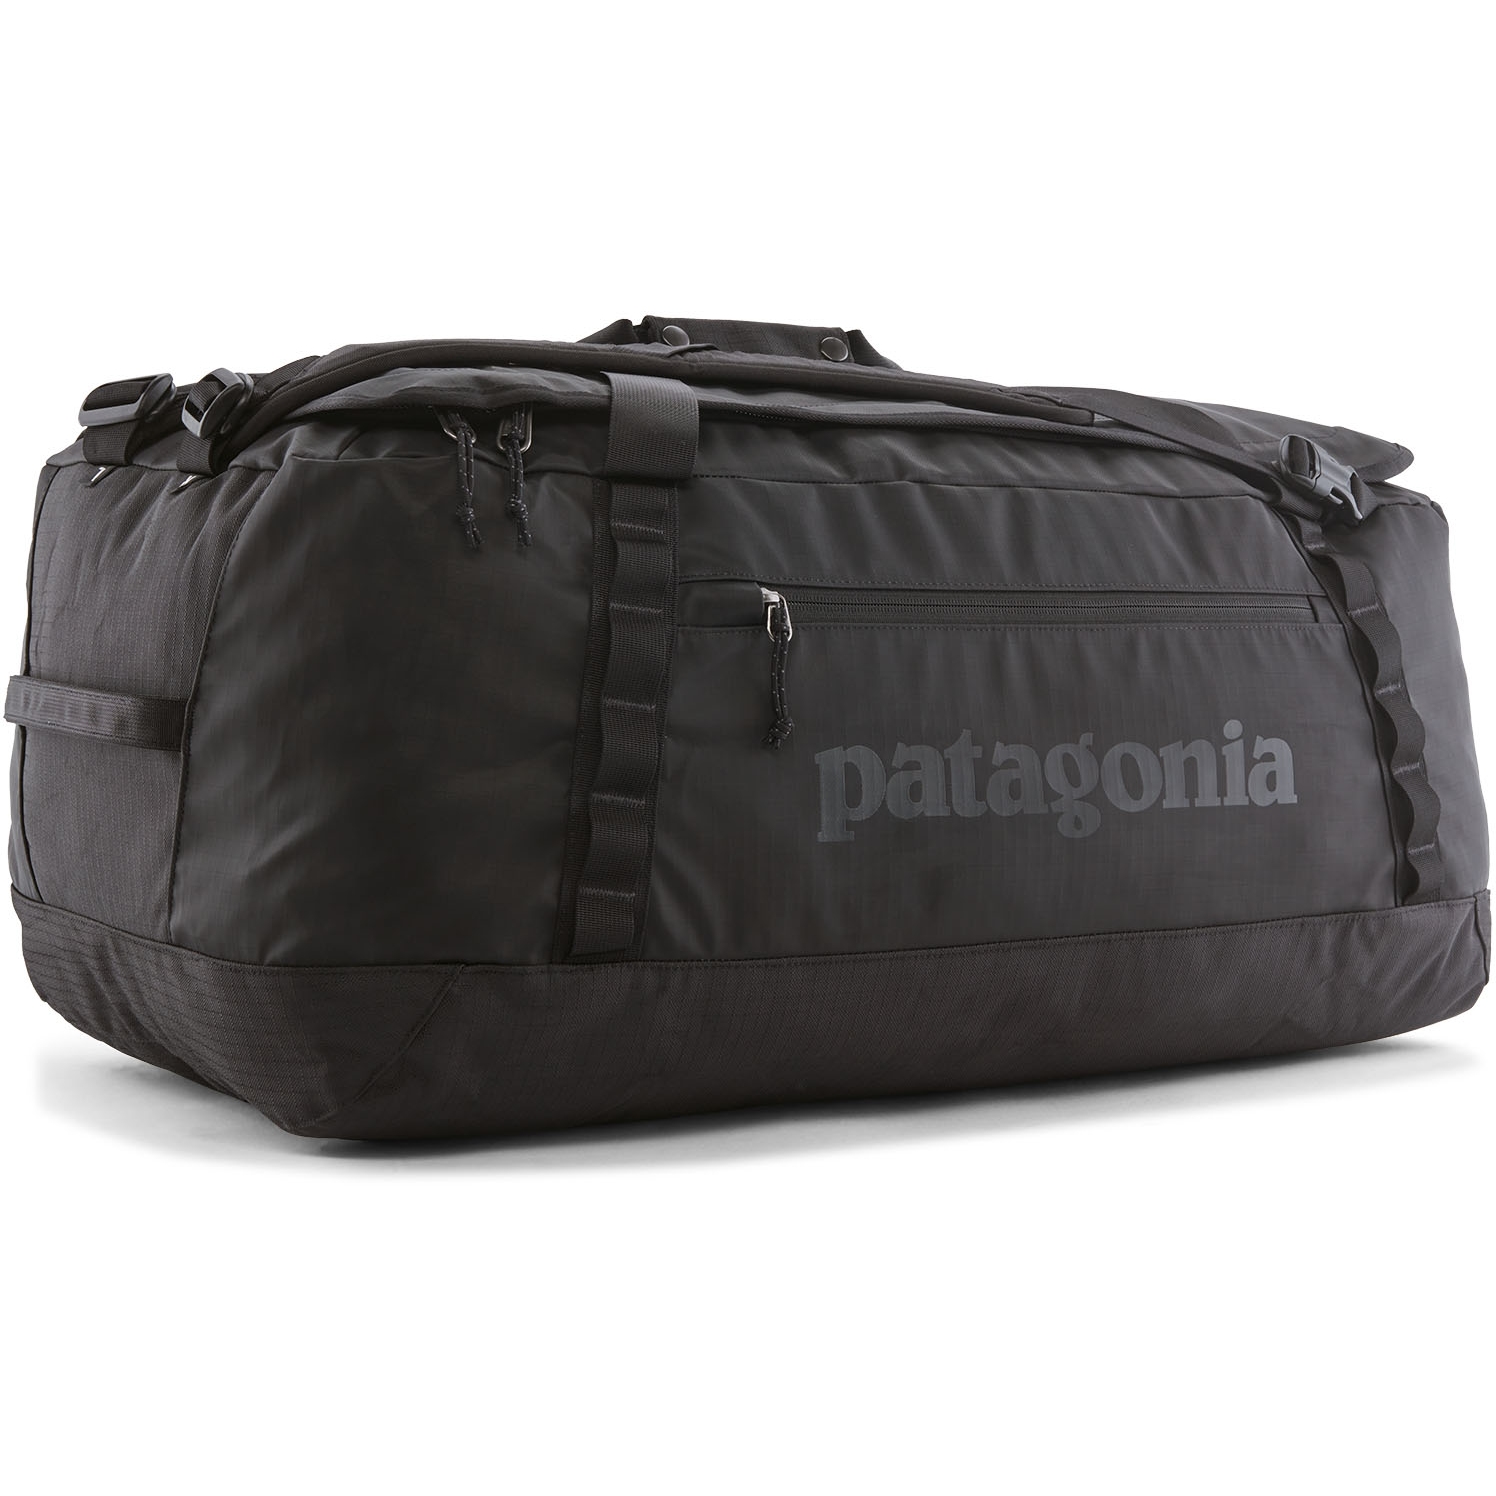 Picture of Patagonia Black Hole Duffel 70L - Black